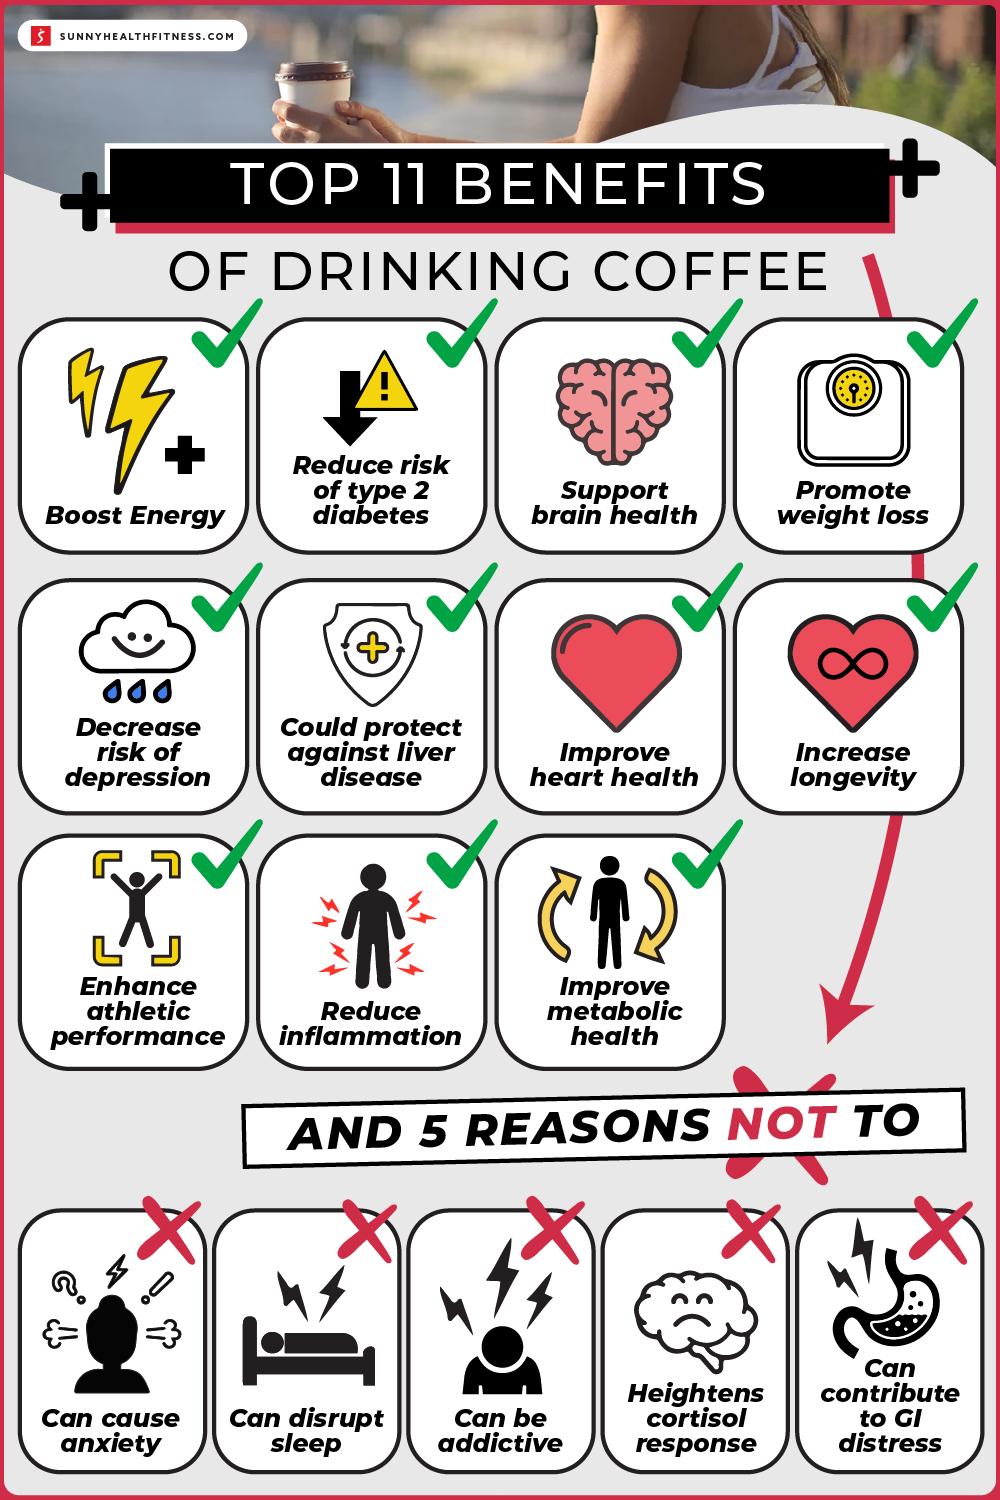 Pros and cons of drinking coffee